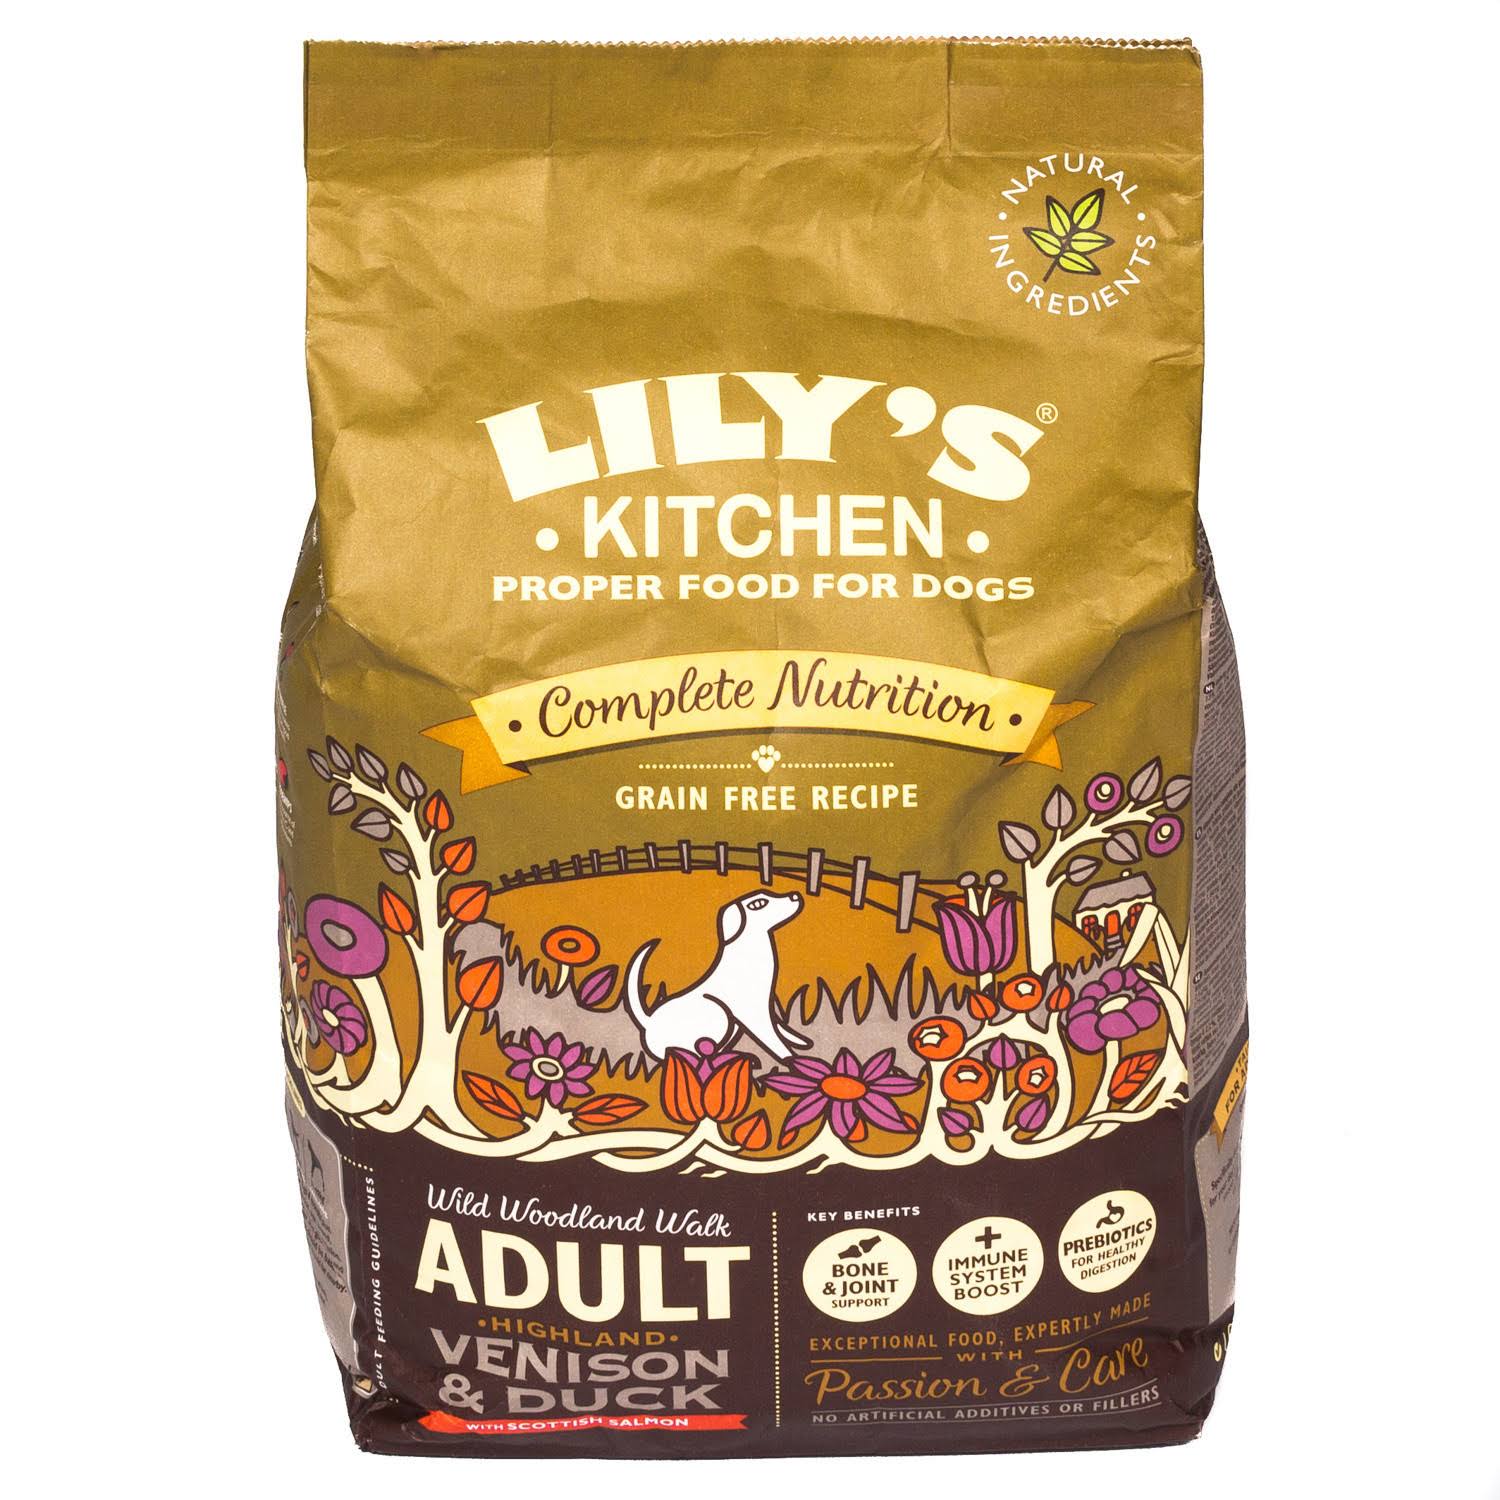 Lily's Kitchen Complete Nutrition Adult Dog Food - Highland Venison and Duck, 2.5kg